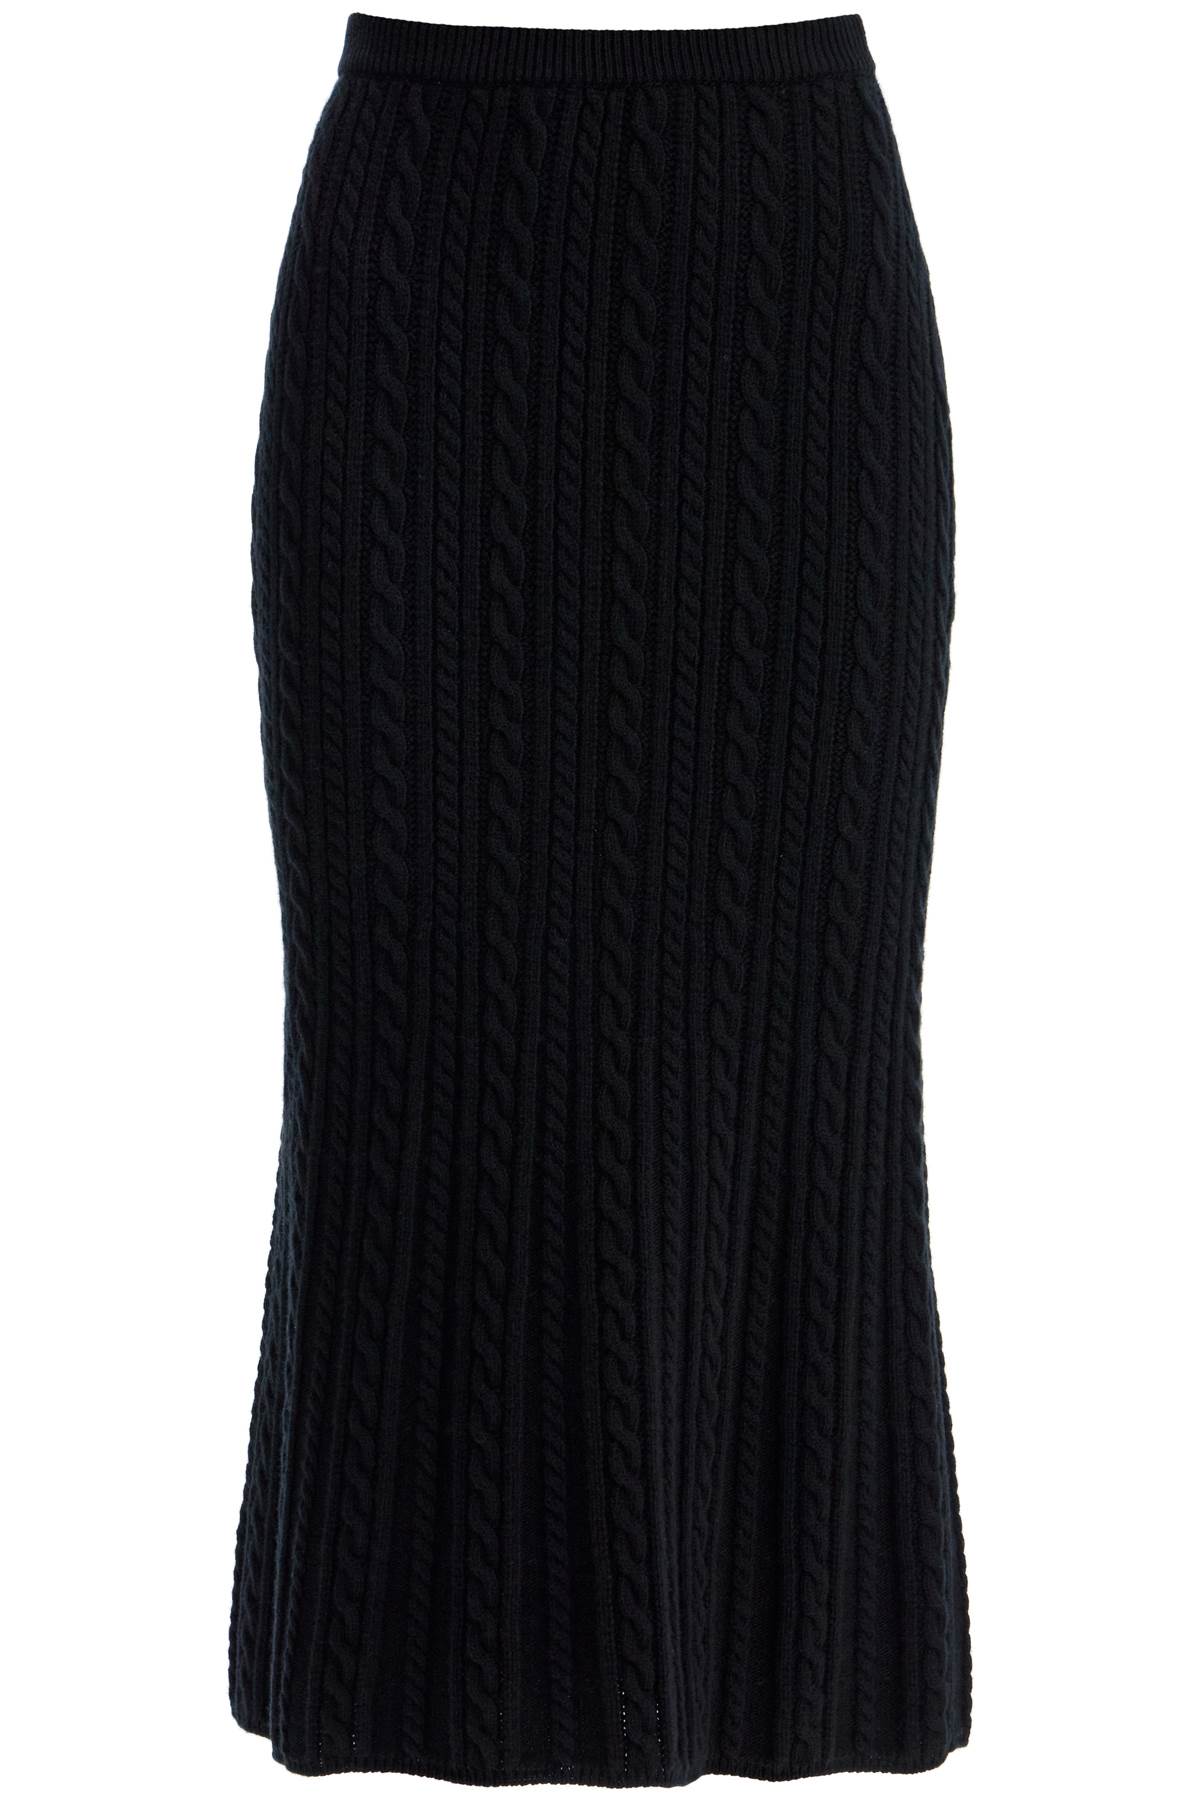 Alessandra Rich ALESSANDRA RICH "knitted midi skirt with cable knit